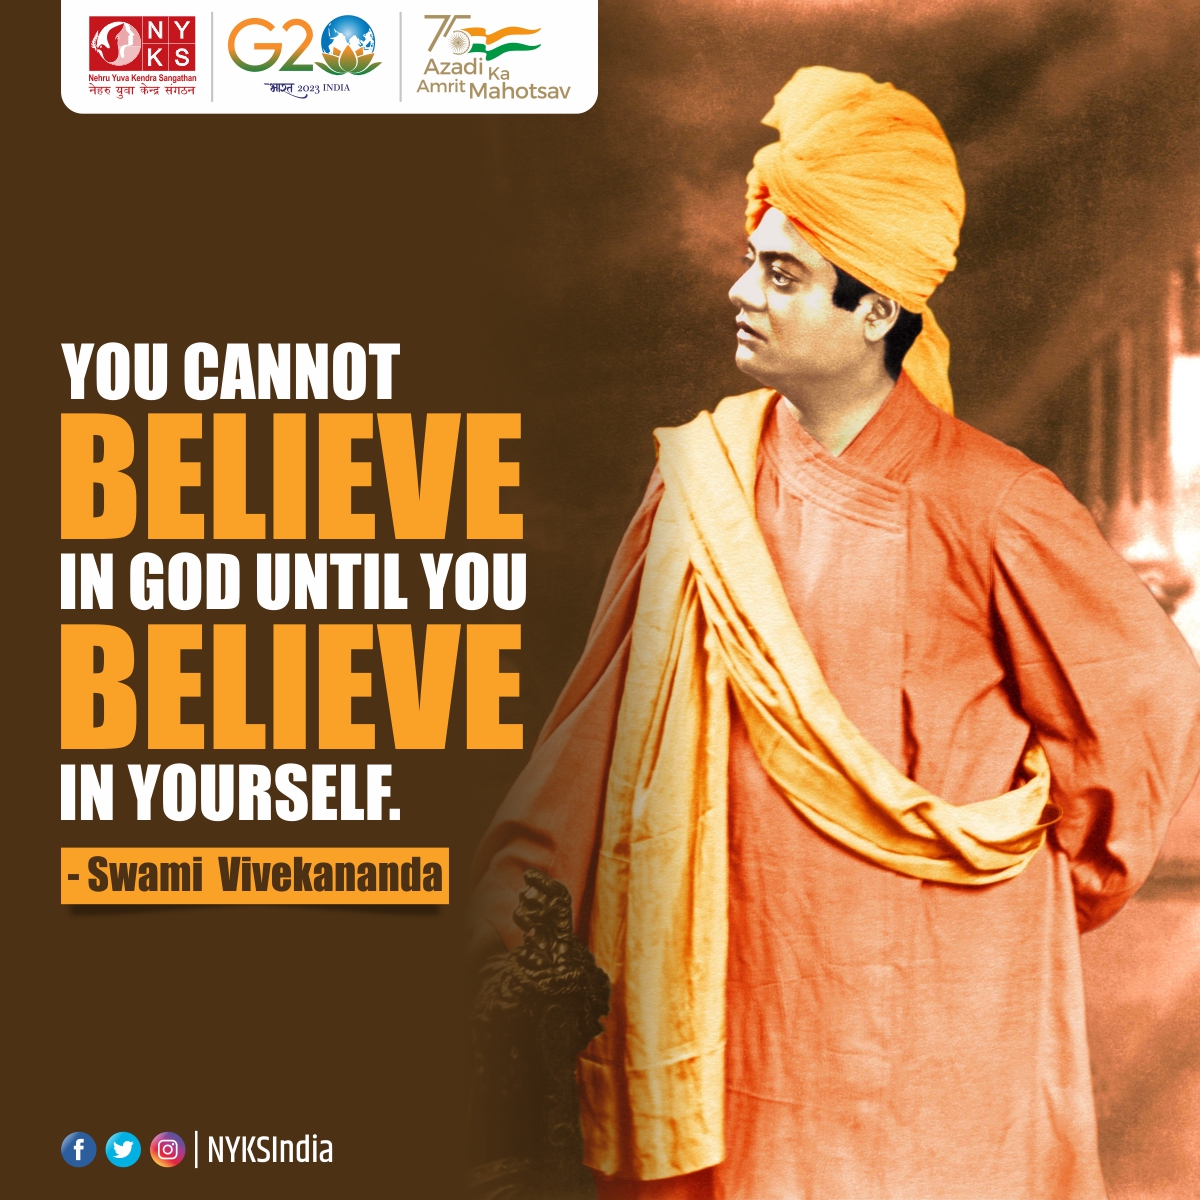 Quote of the Day!

'You cannot believe in god until you believe in yourself.' - Swami Vivekananda 

#quoteoftheday #SwamiVivekananda #ThoughtForTheDay #swamivivekanandaquotes